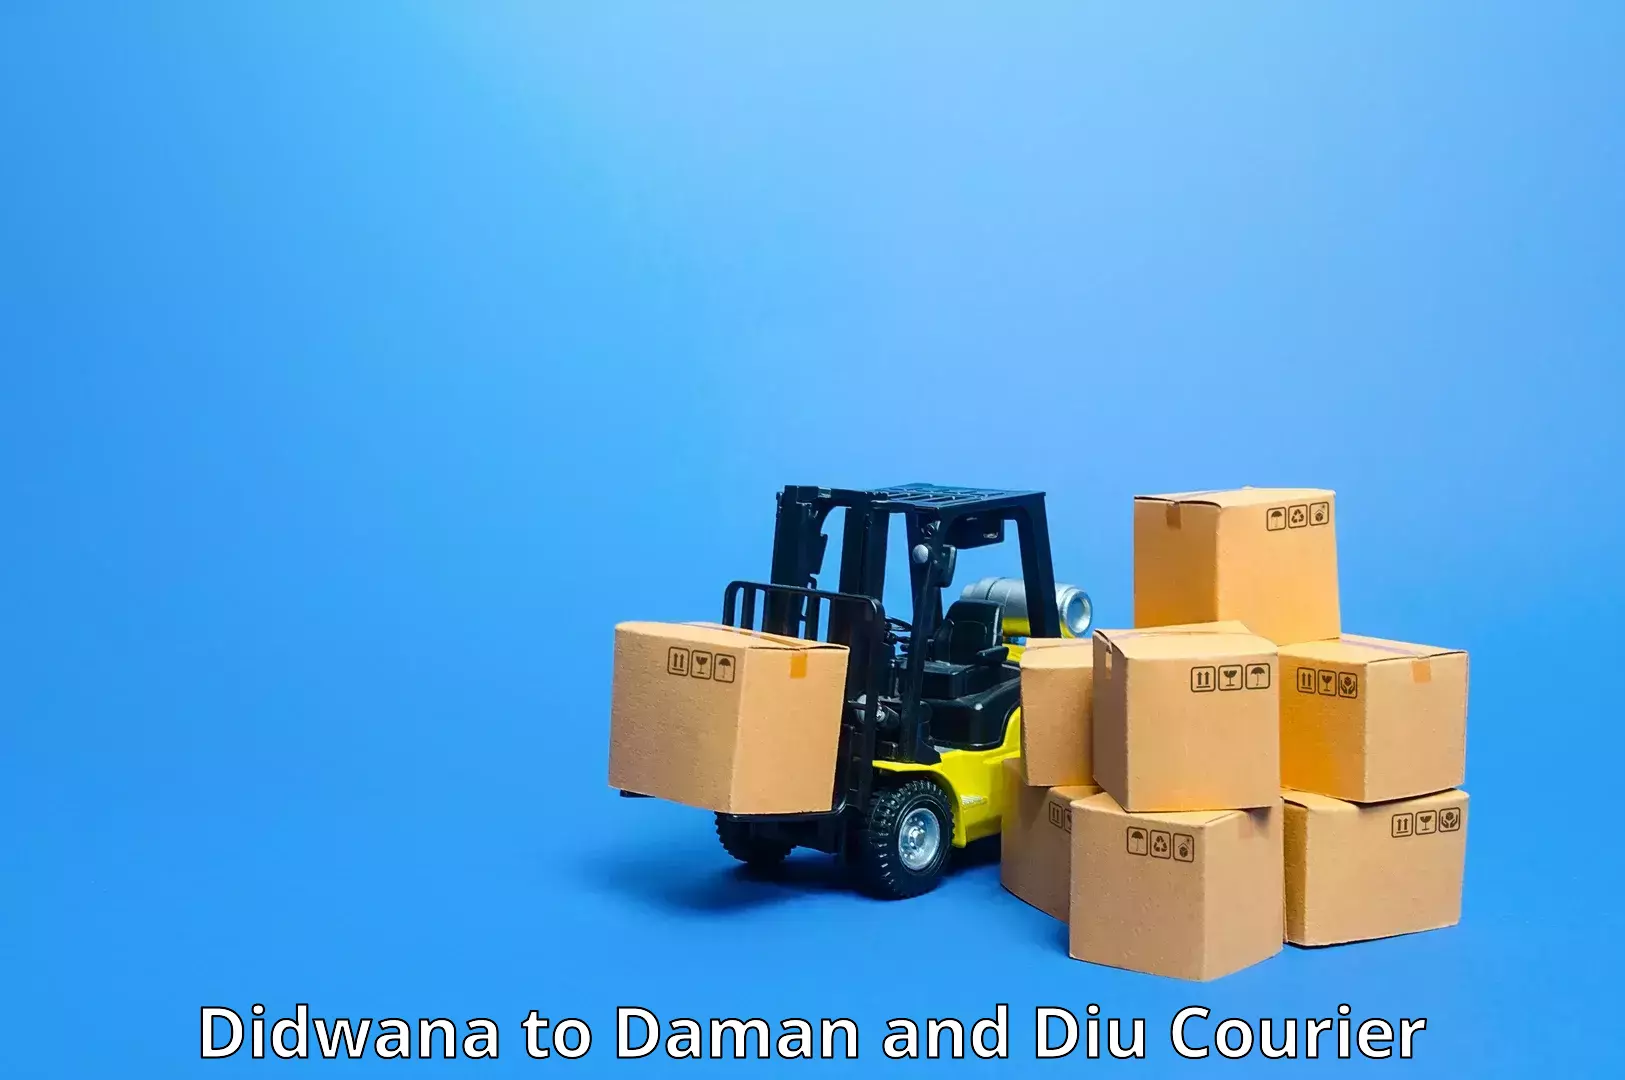 Efficient shipping operations Didwana to Daman and Diu